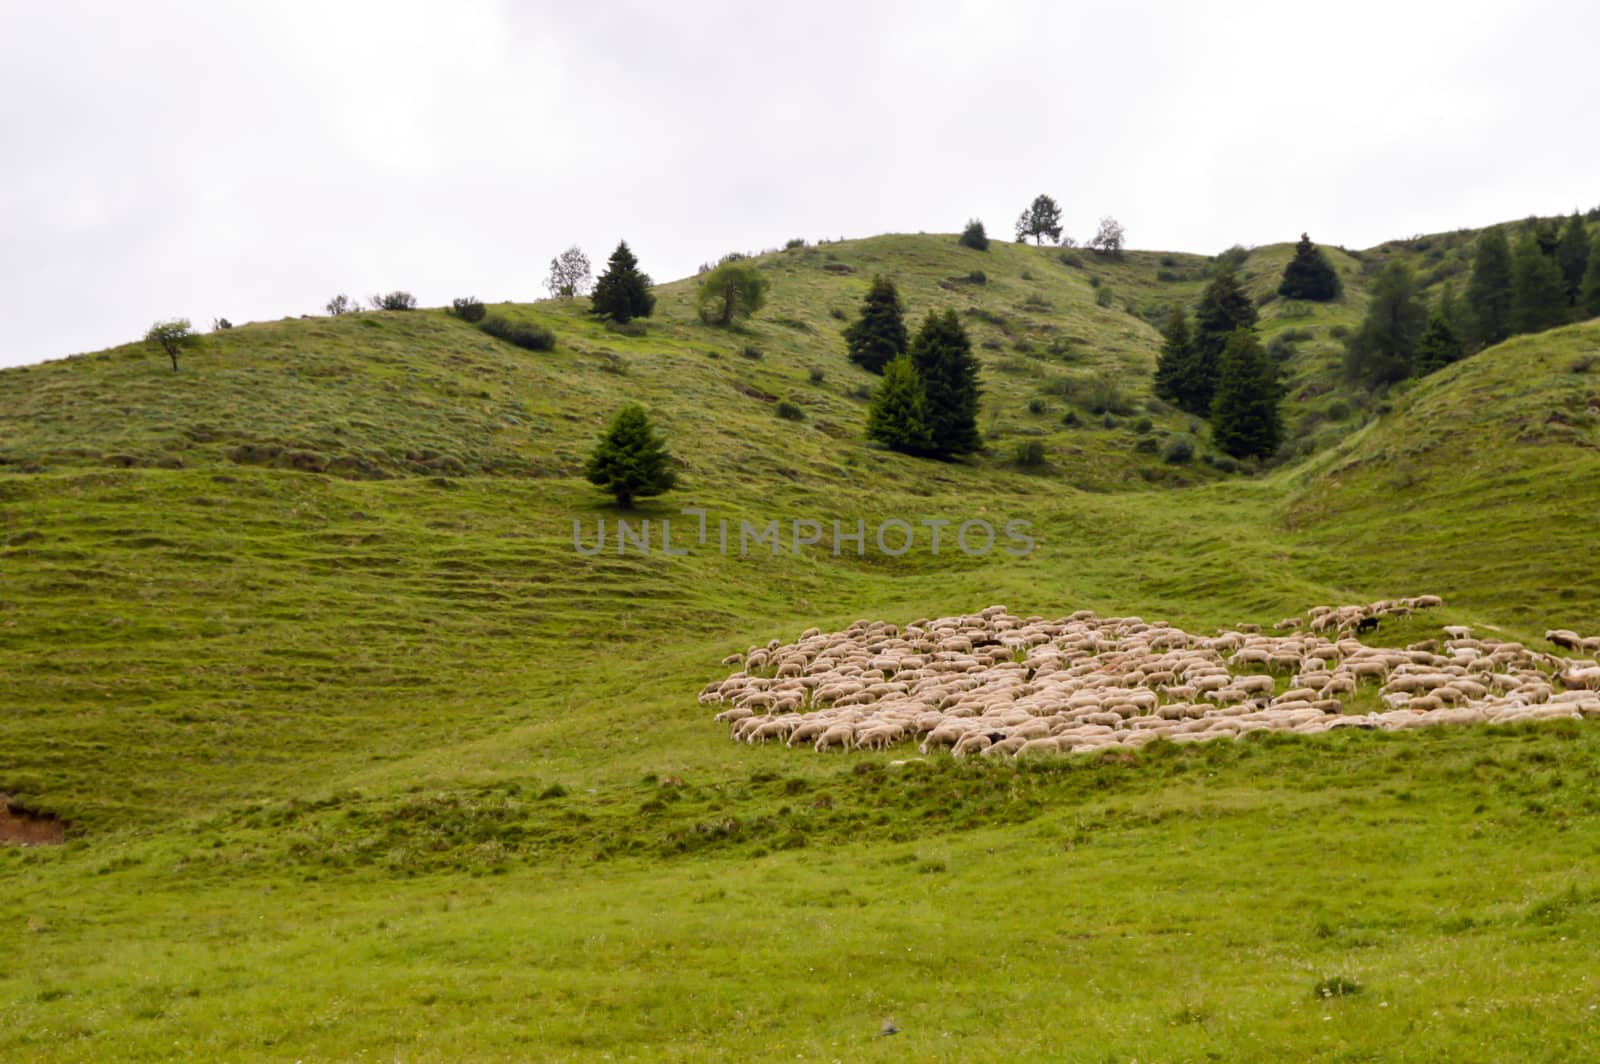 Herds of sheep in a green meadow on a hill of dolomites in Italy